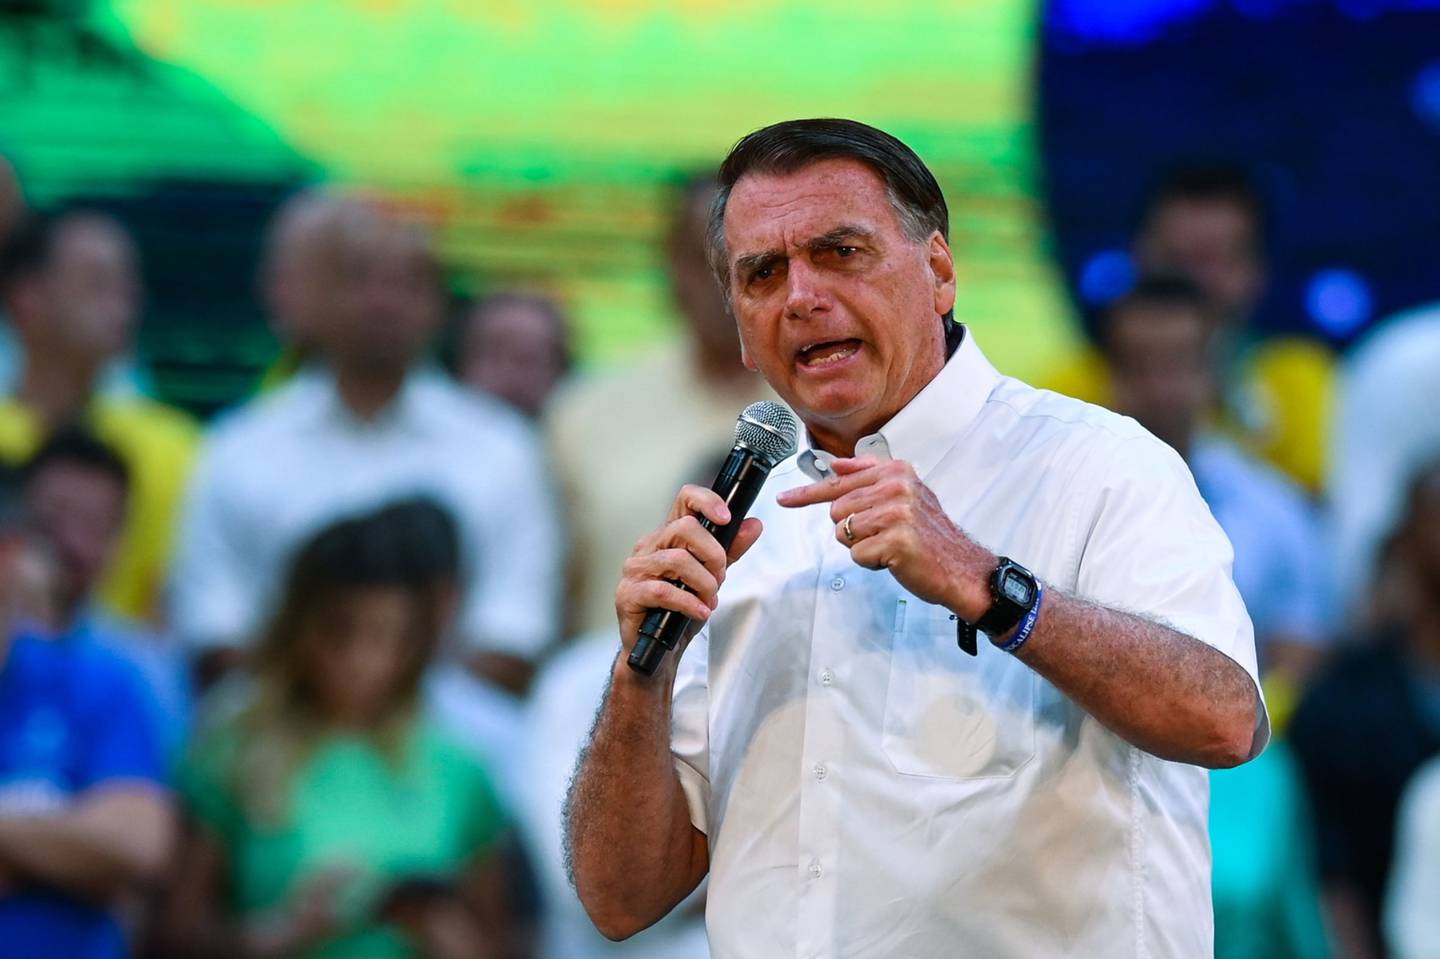 Jair Bolsonaro promised to further ease laws that restrict the ownership of fire weapons if re-elected in October.